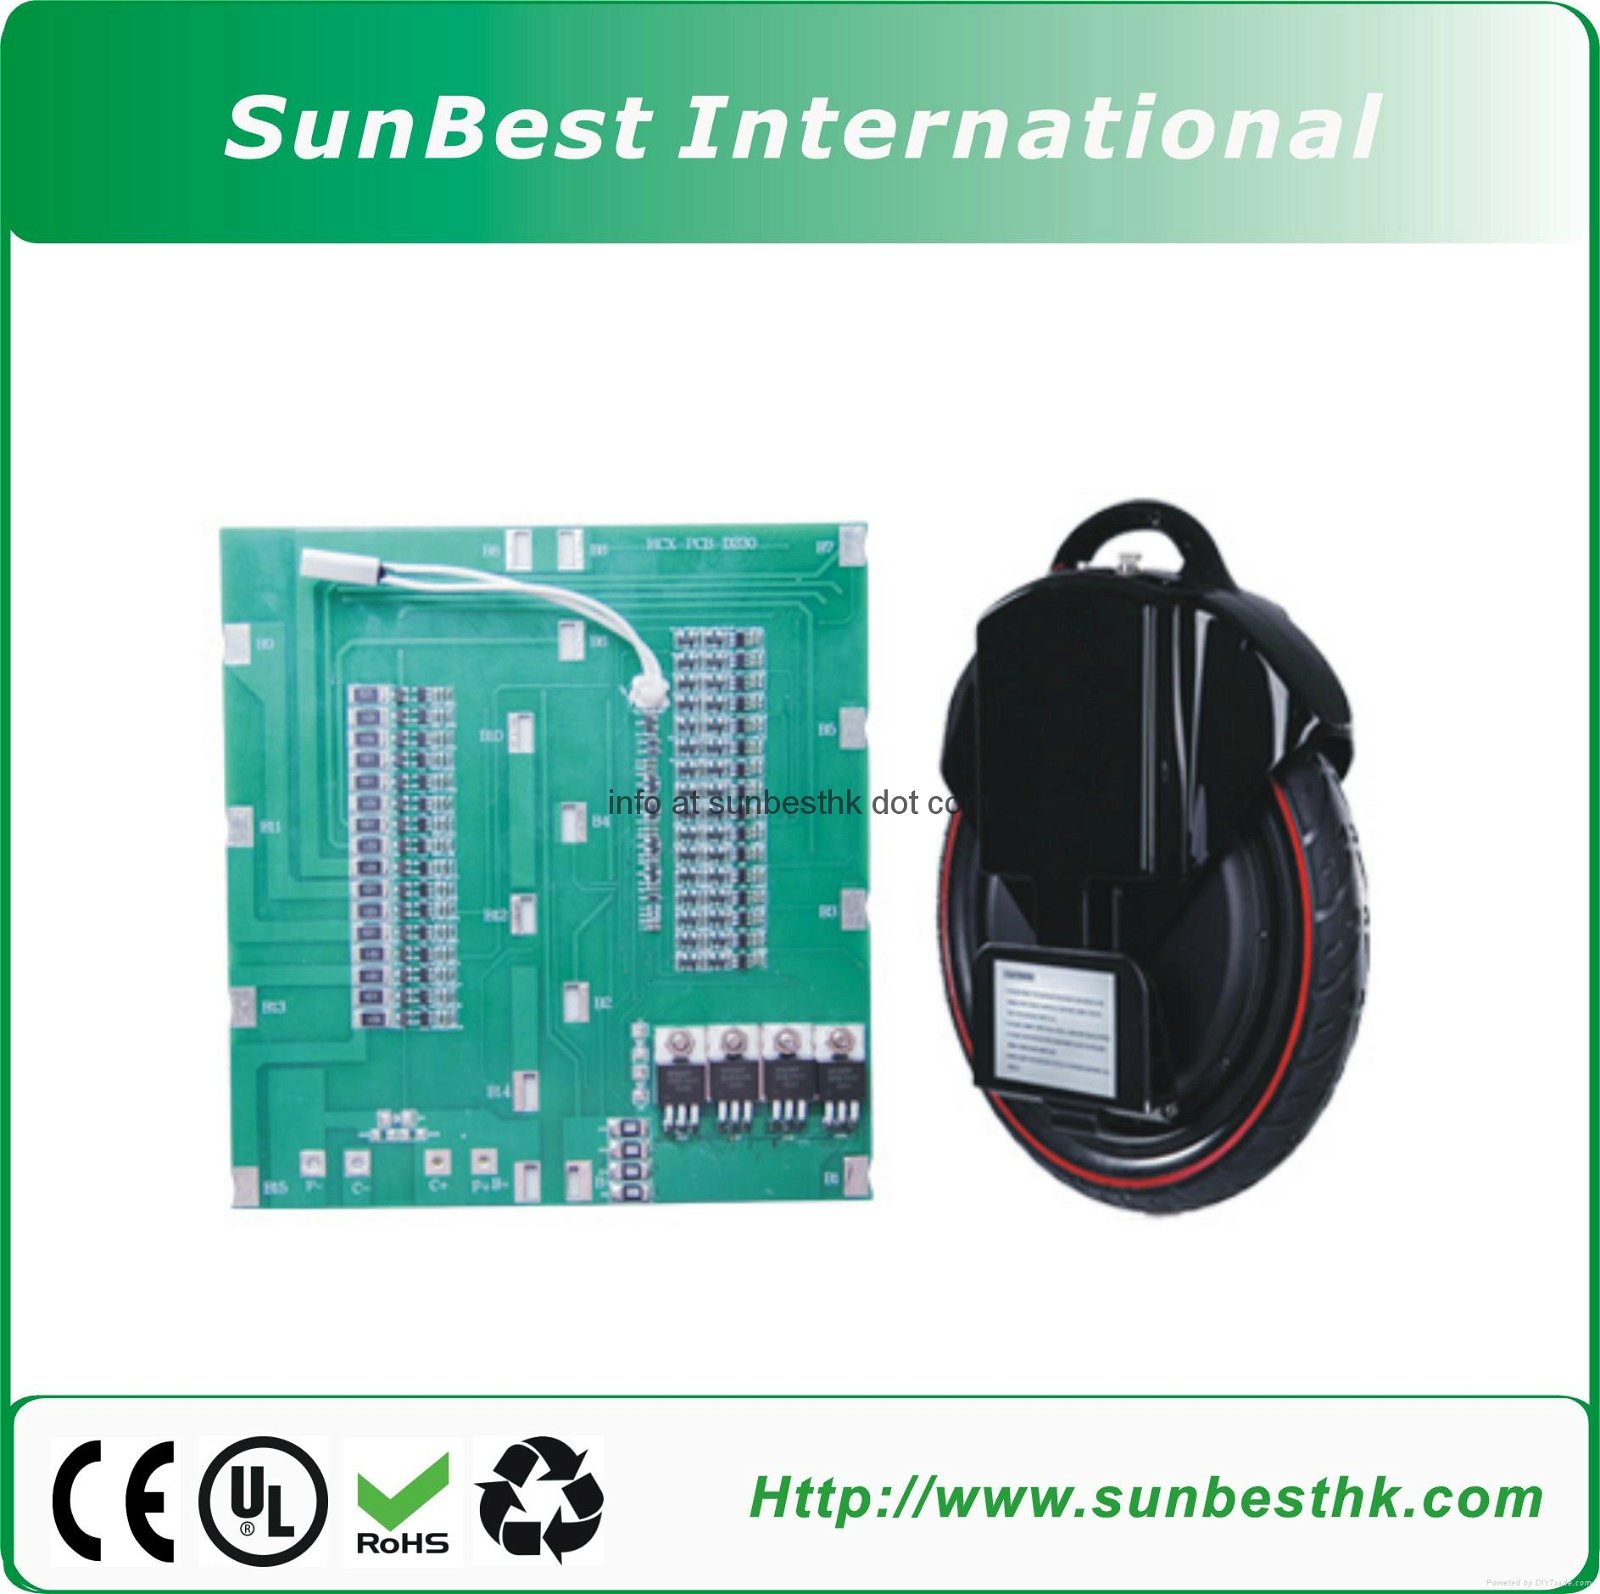  Protection Circuit Board (PCB) for 40.7V 11S Li-ion and Li-Polymer Battery 4